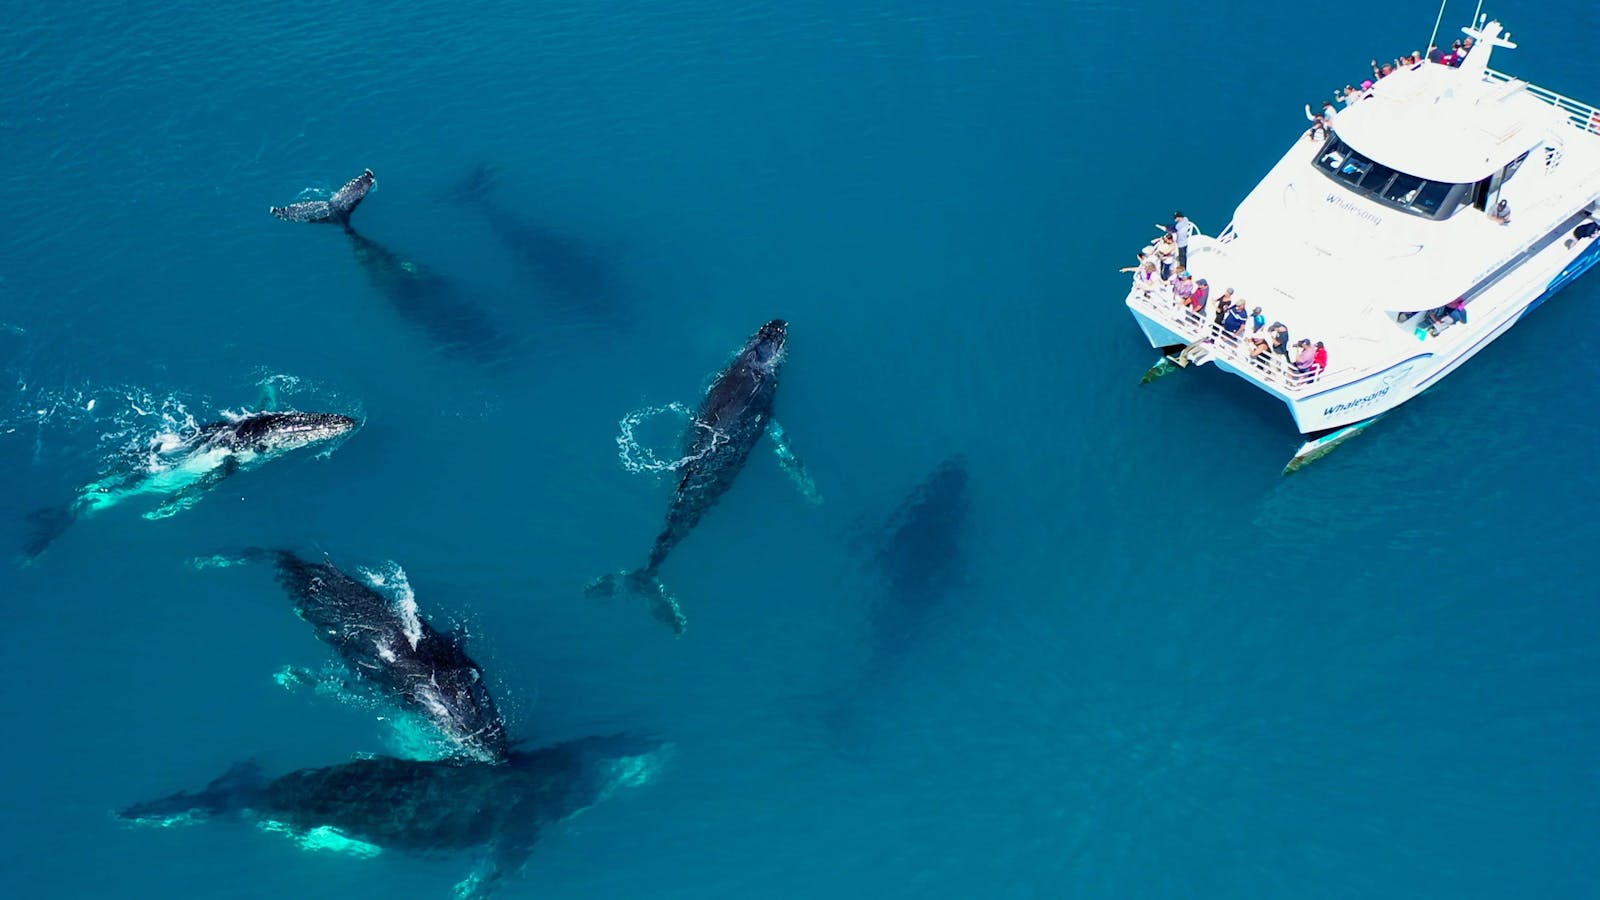 Eight humpback whales approaching Whalesong vessel ready to mug the boat